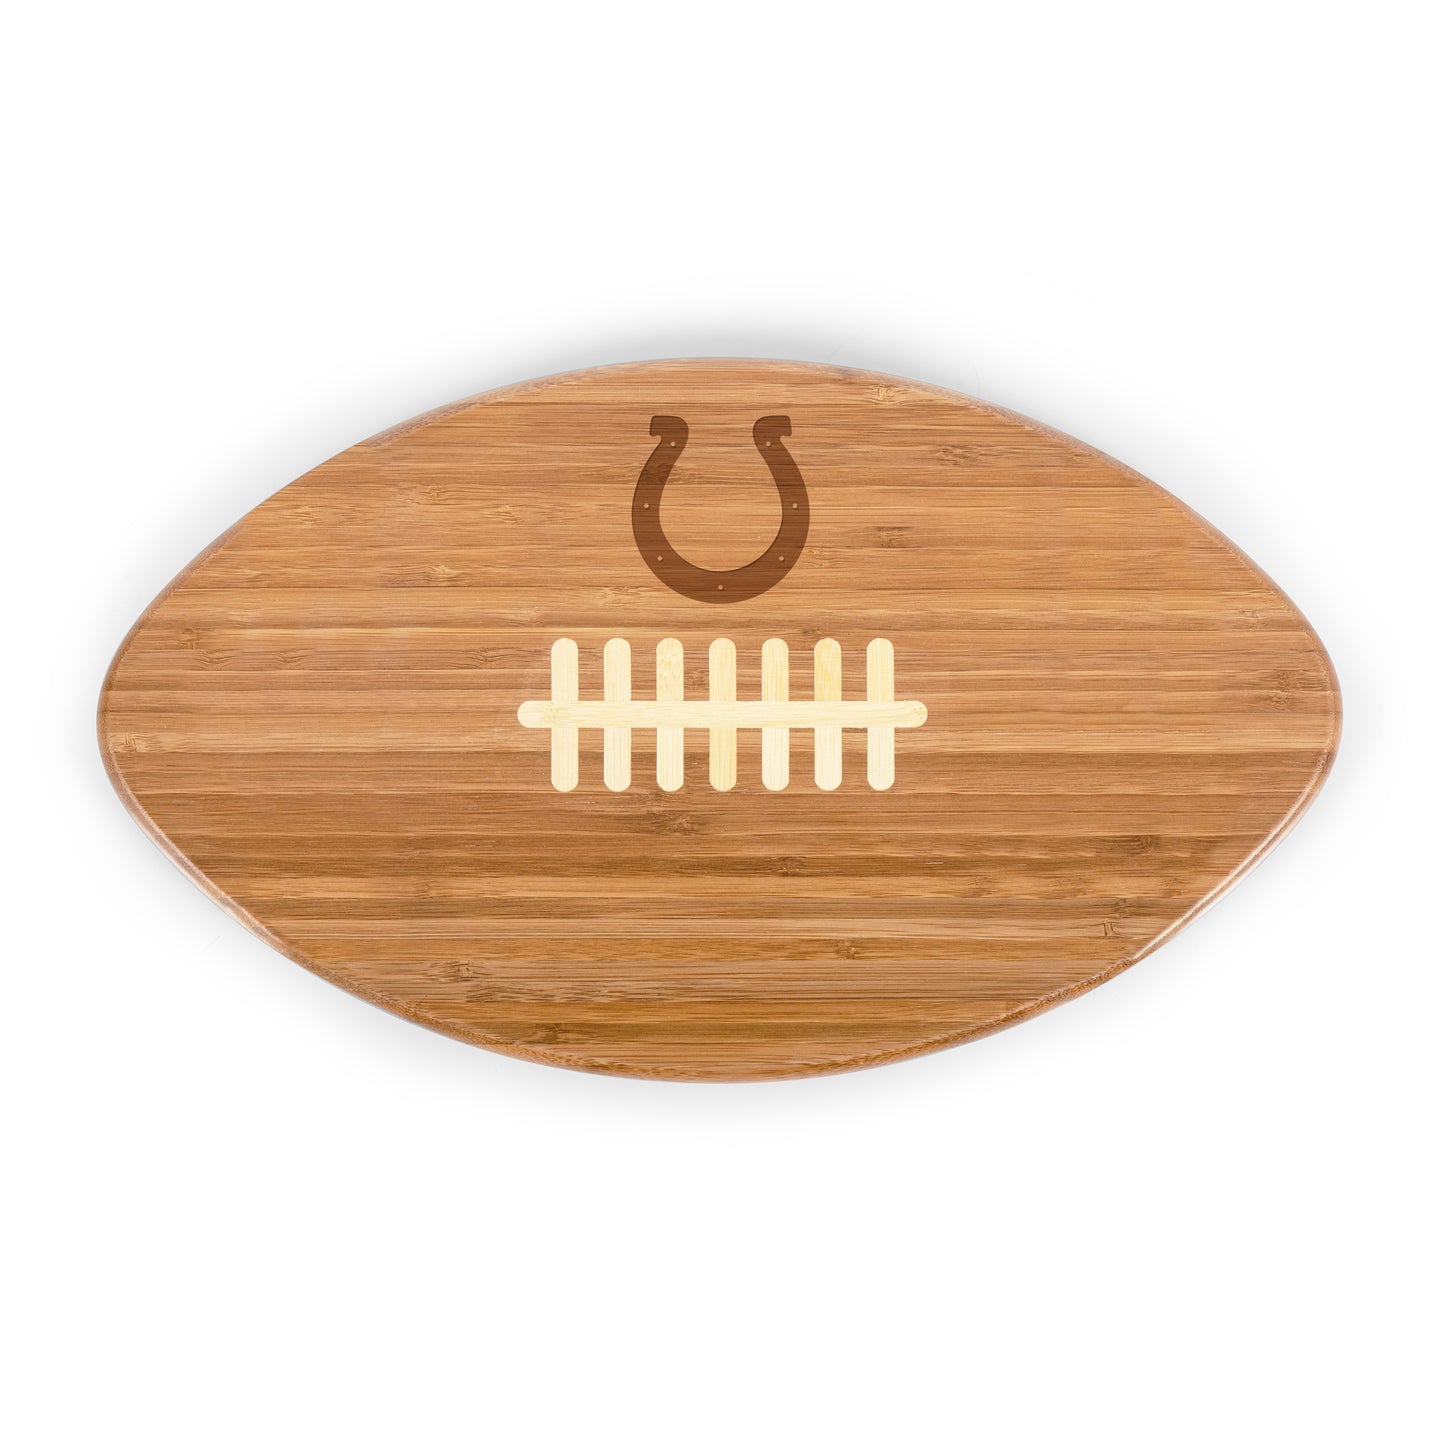 Indianapolis Colts - Touchdown! Football Cutting Board & Serving Tray